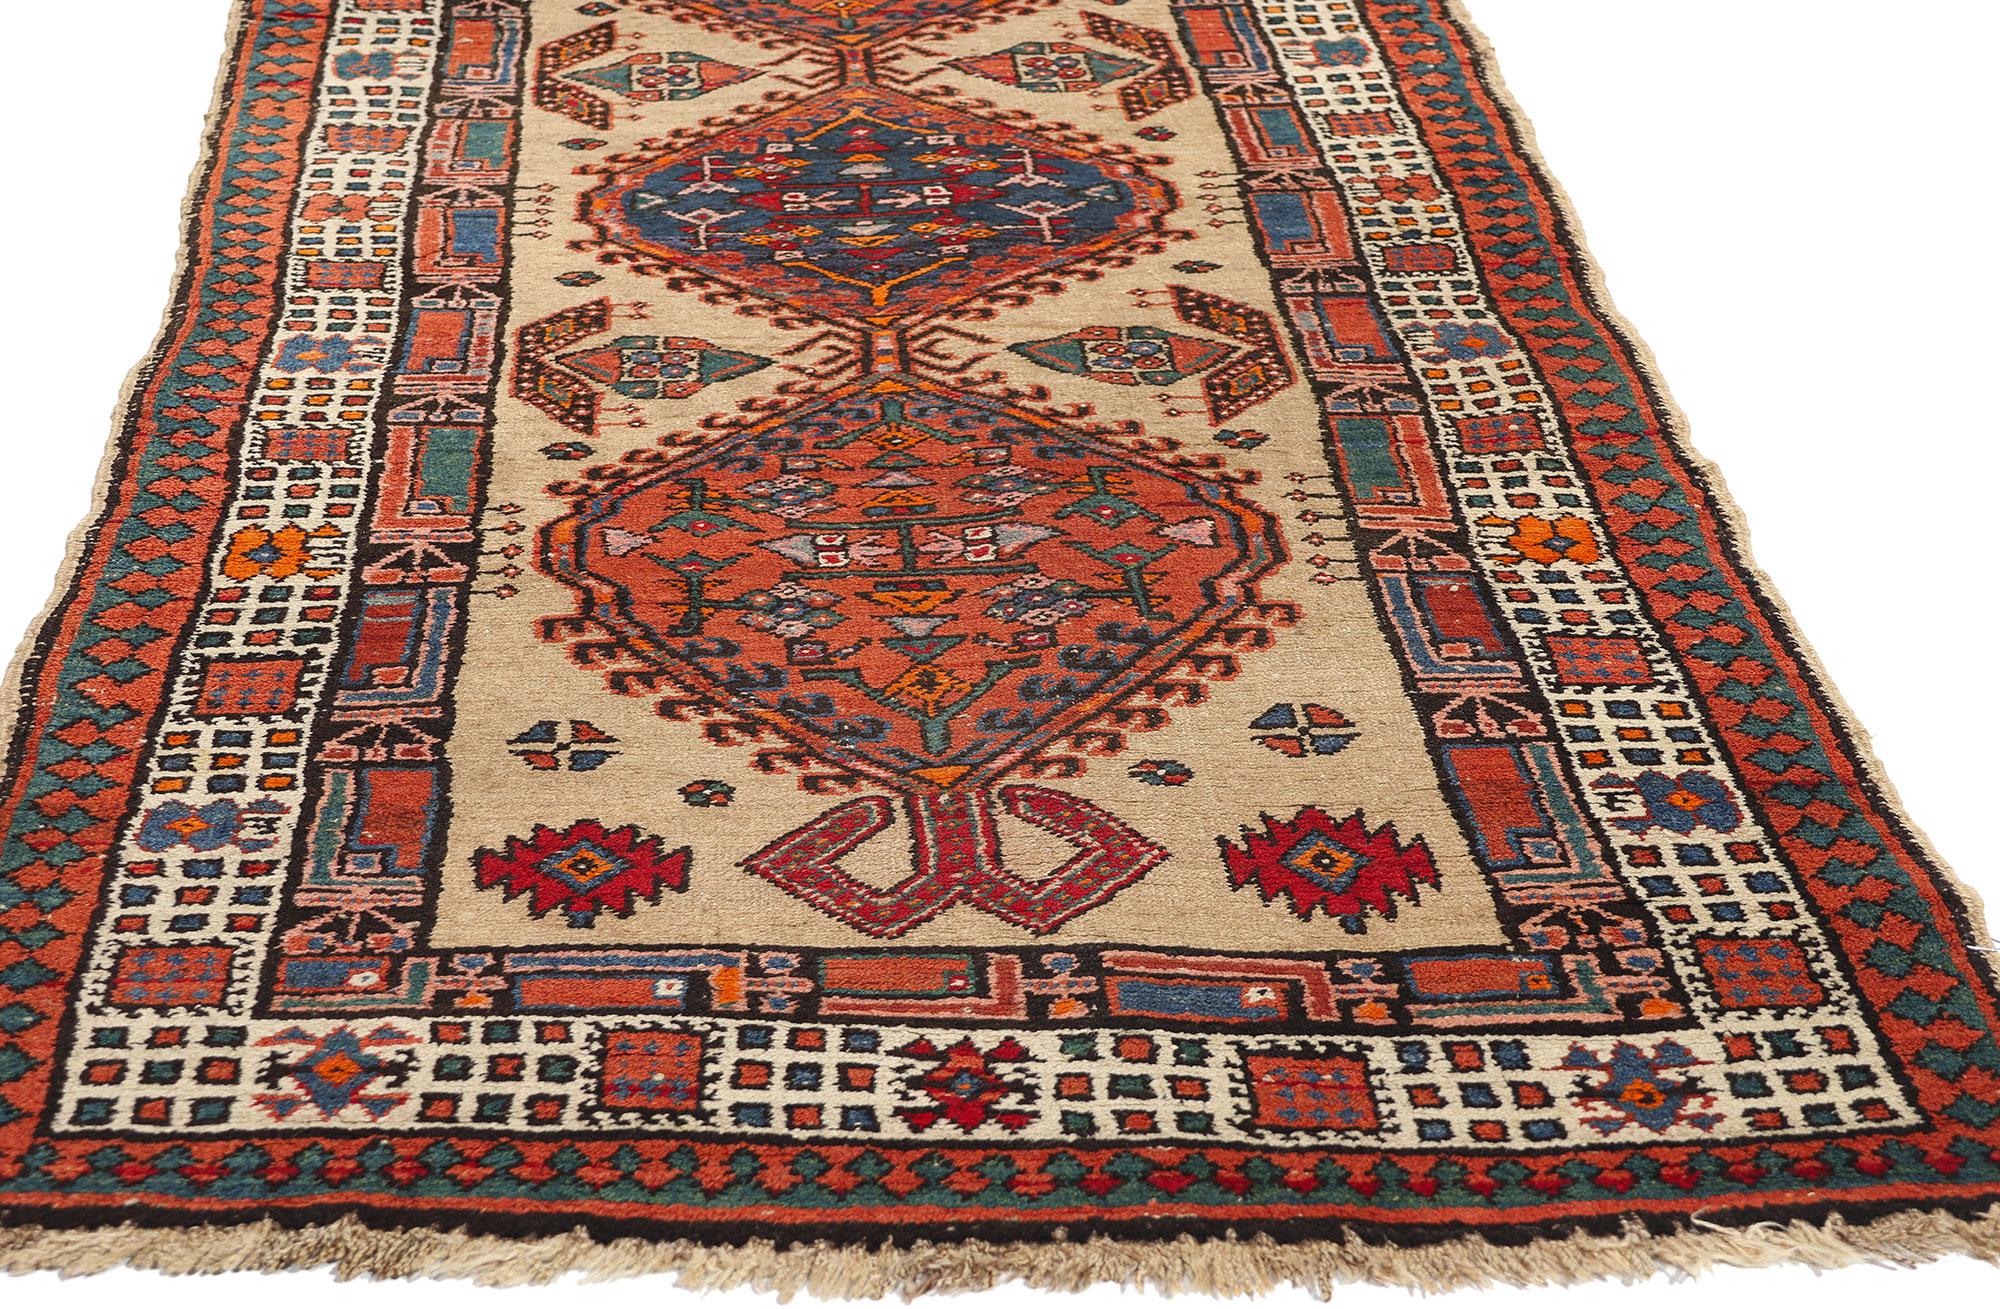 73234 Antique Persian Sarab Rug Runner, 03’02 x 10’10. Persian Sarab rugs and carpet runners, originating from Iran's northwest region, are renowned for their unparalleled craftsmanship, intricate designs, and opulent materials. Crafted from the